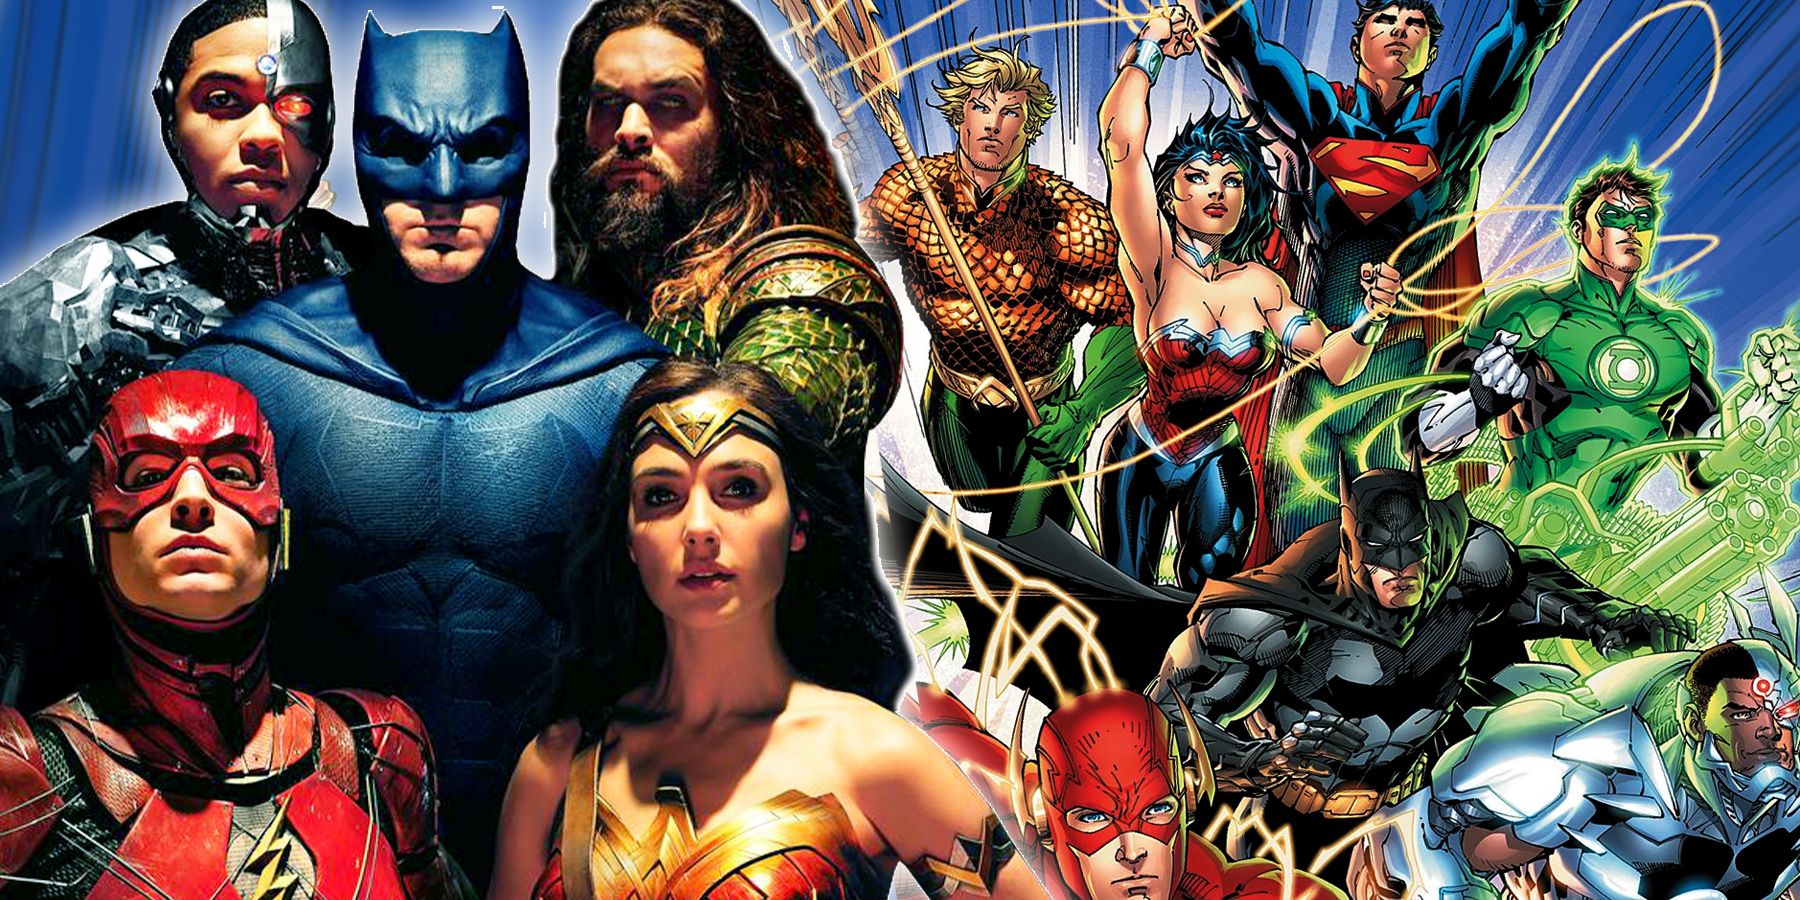 Adapting The Heart Of Marvel And DC Comics To Film And TV Is The Real Goal